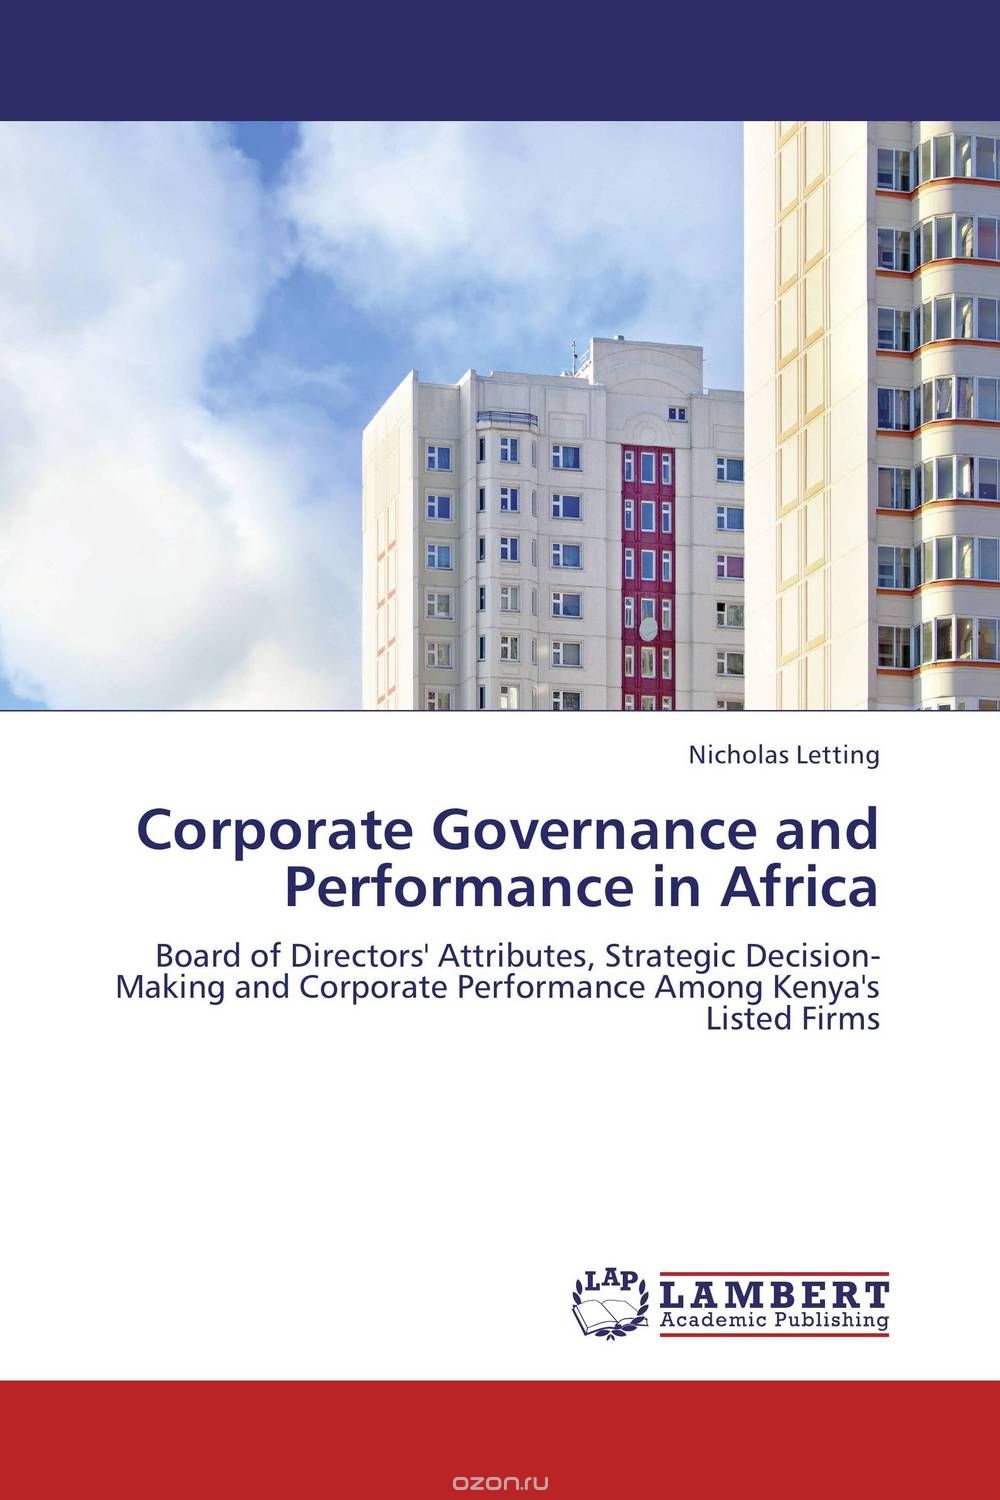 Corporate Governance and Performance in Africa